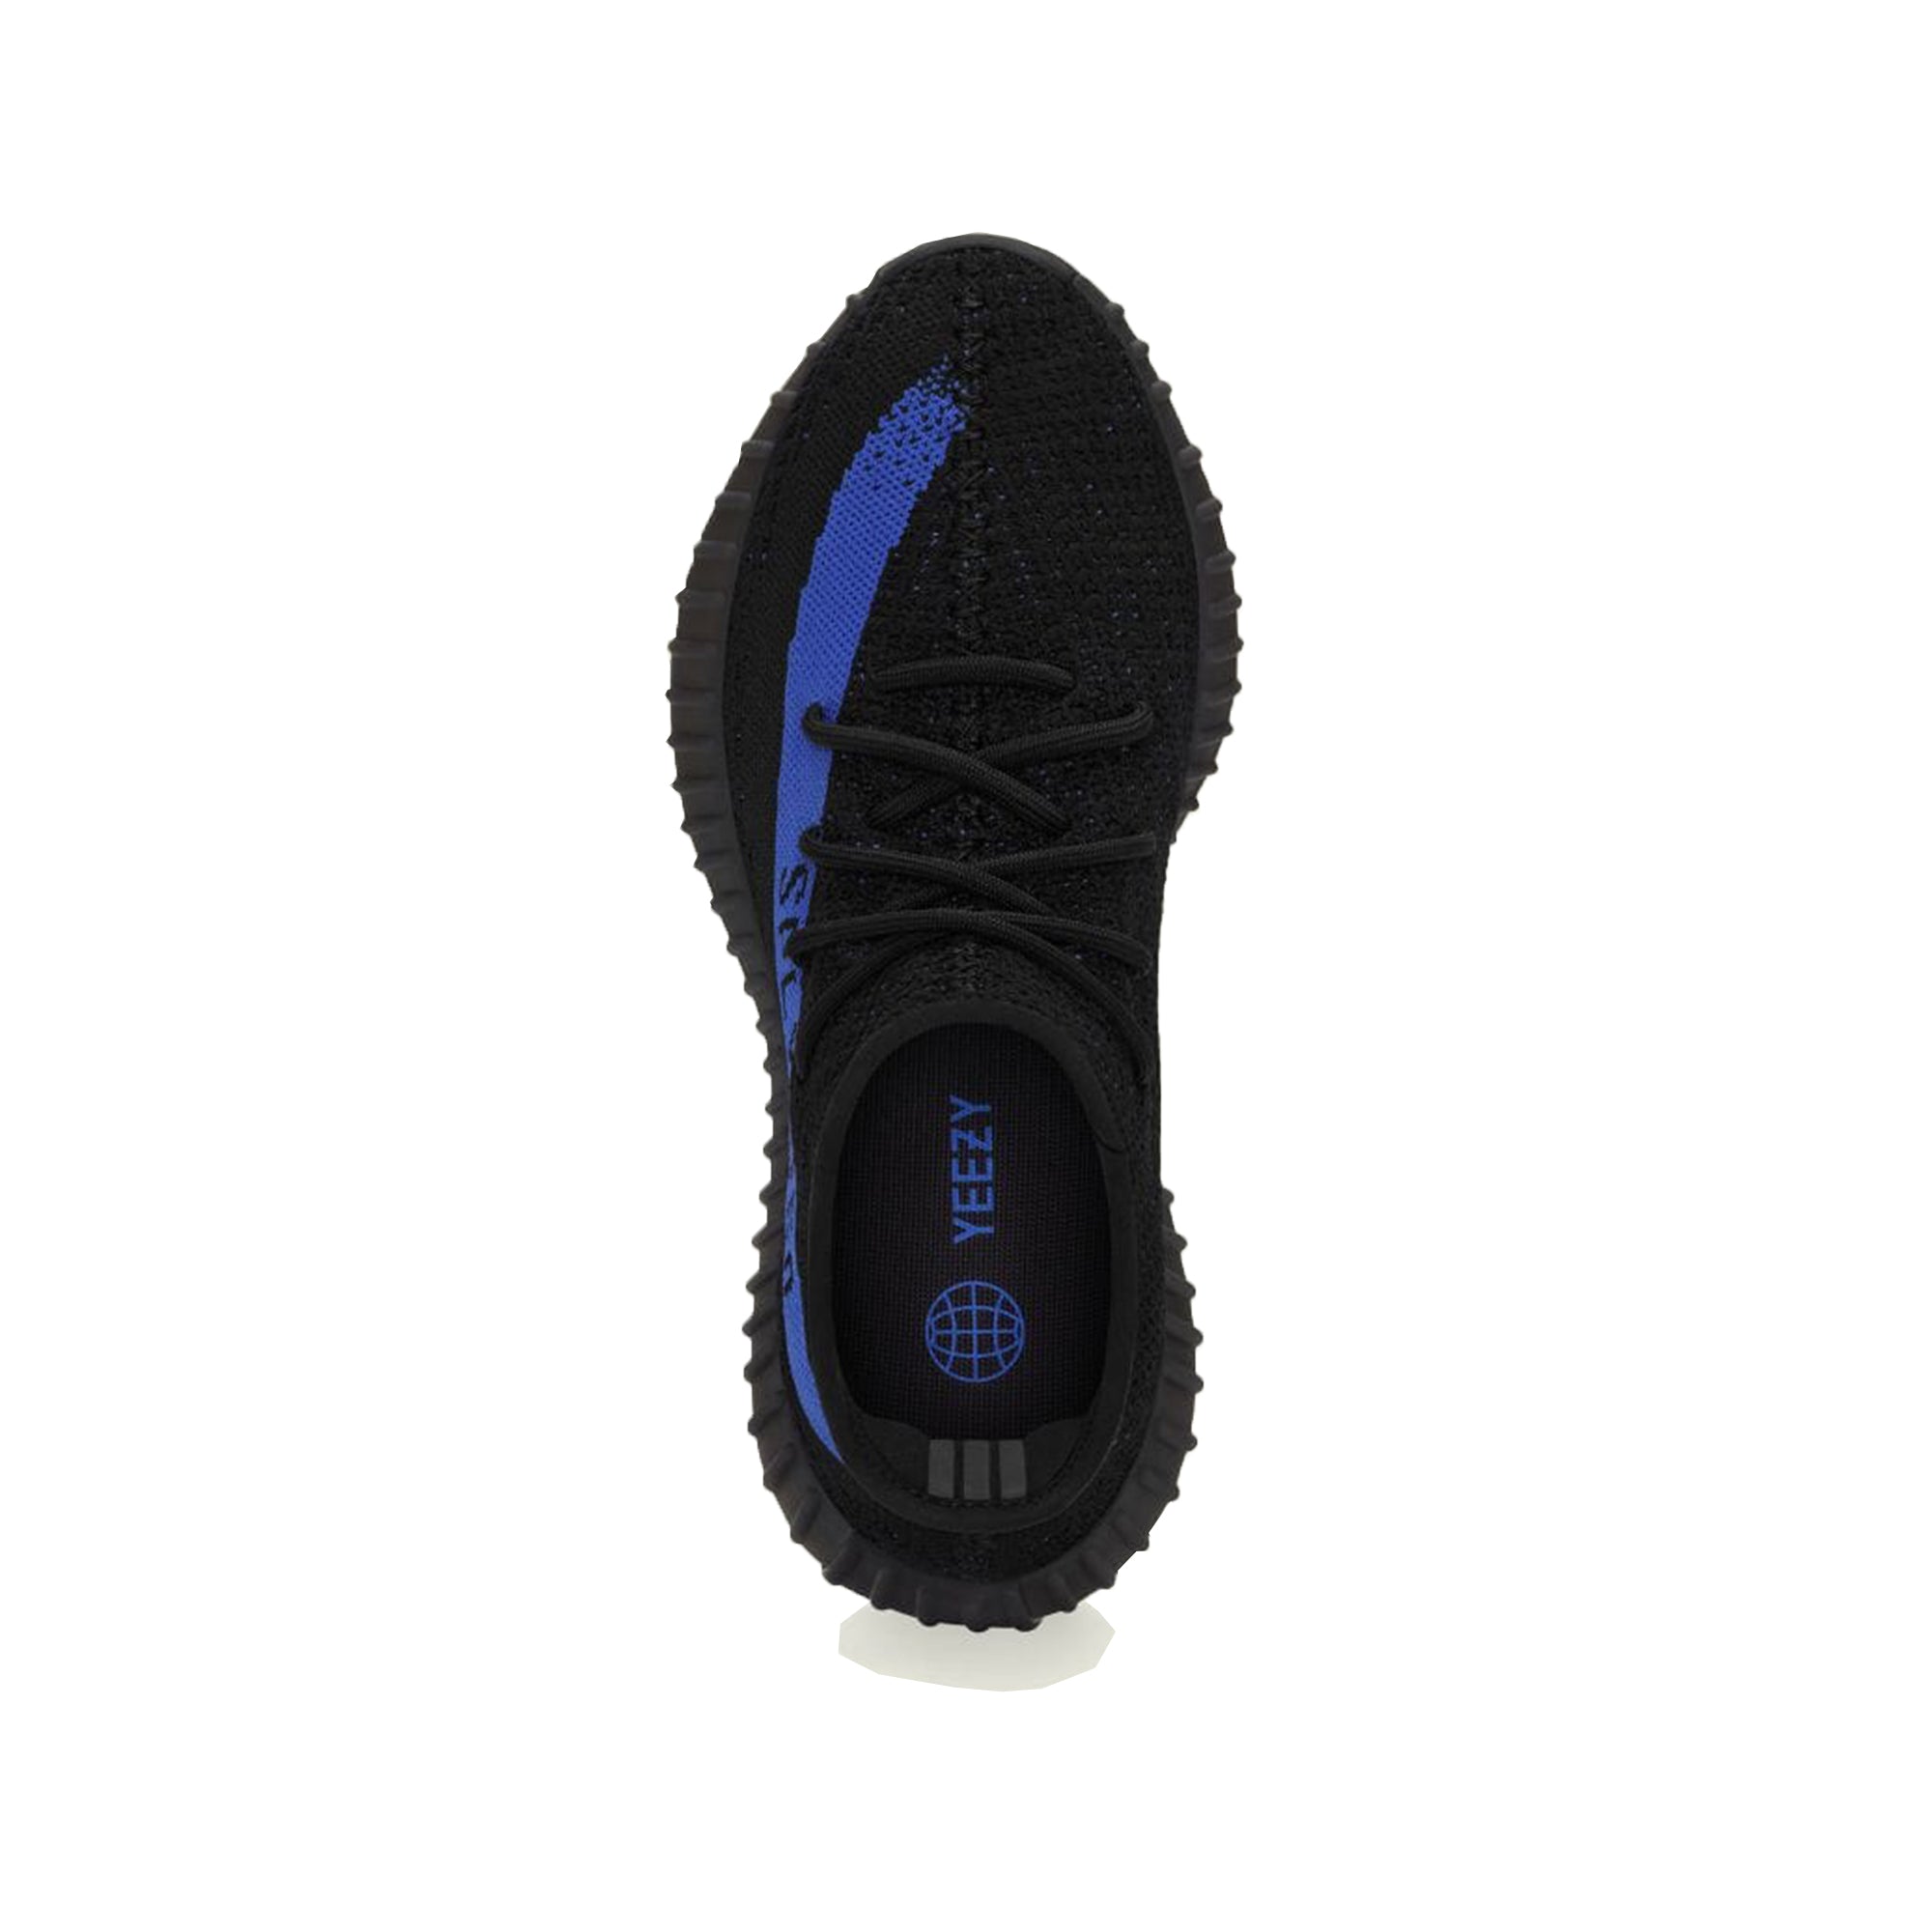 Adidas Yeezy Boost 350v2 Dazzling Blue Shoes